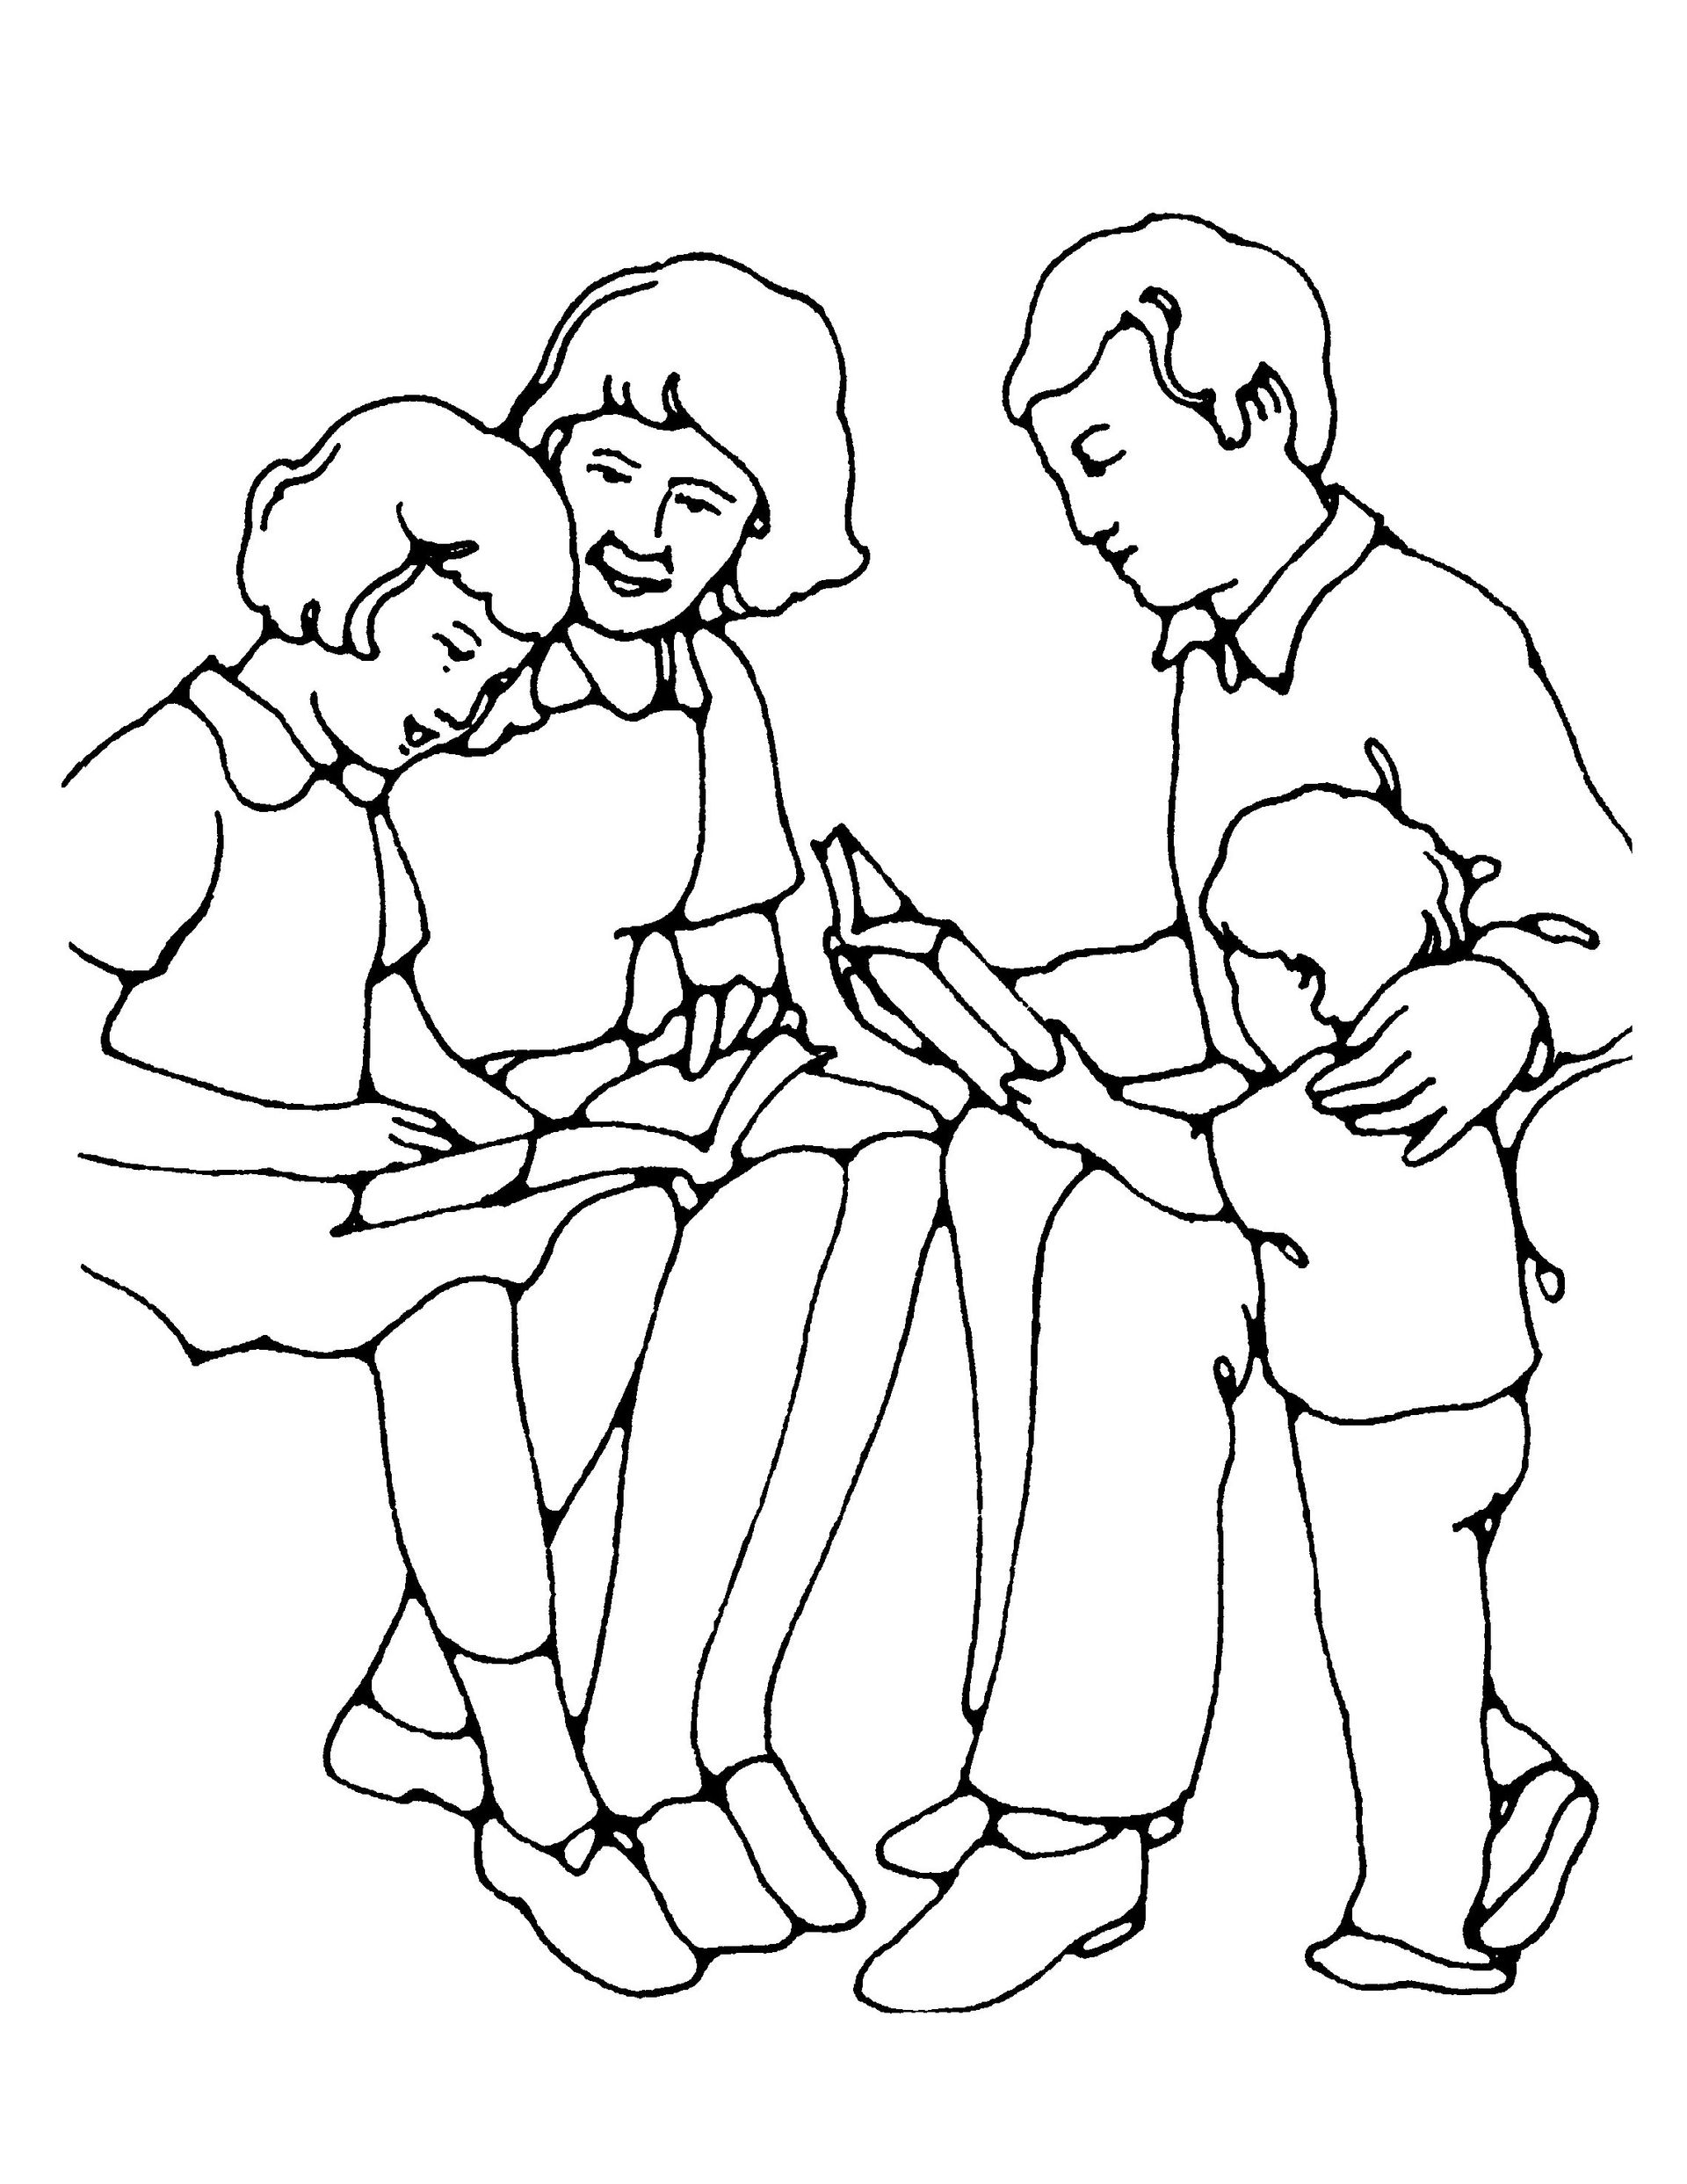 A family of four sits together and reads the scriptures.